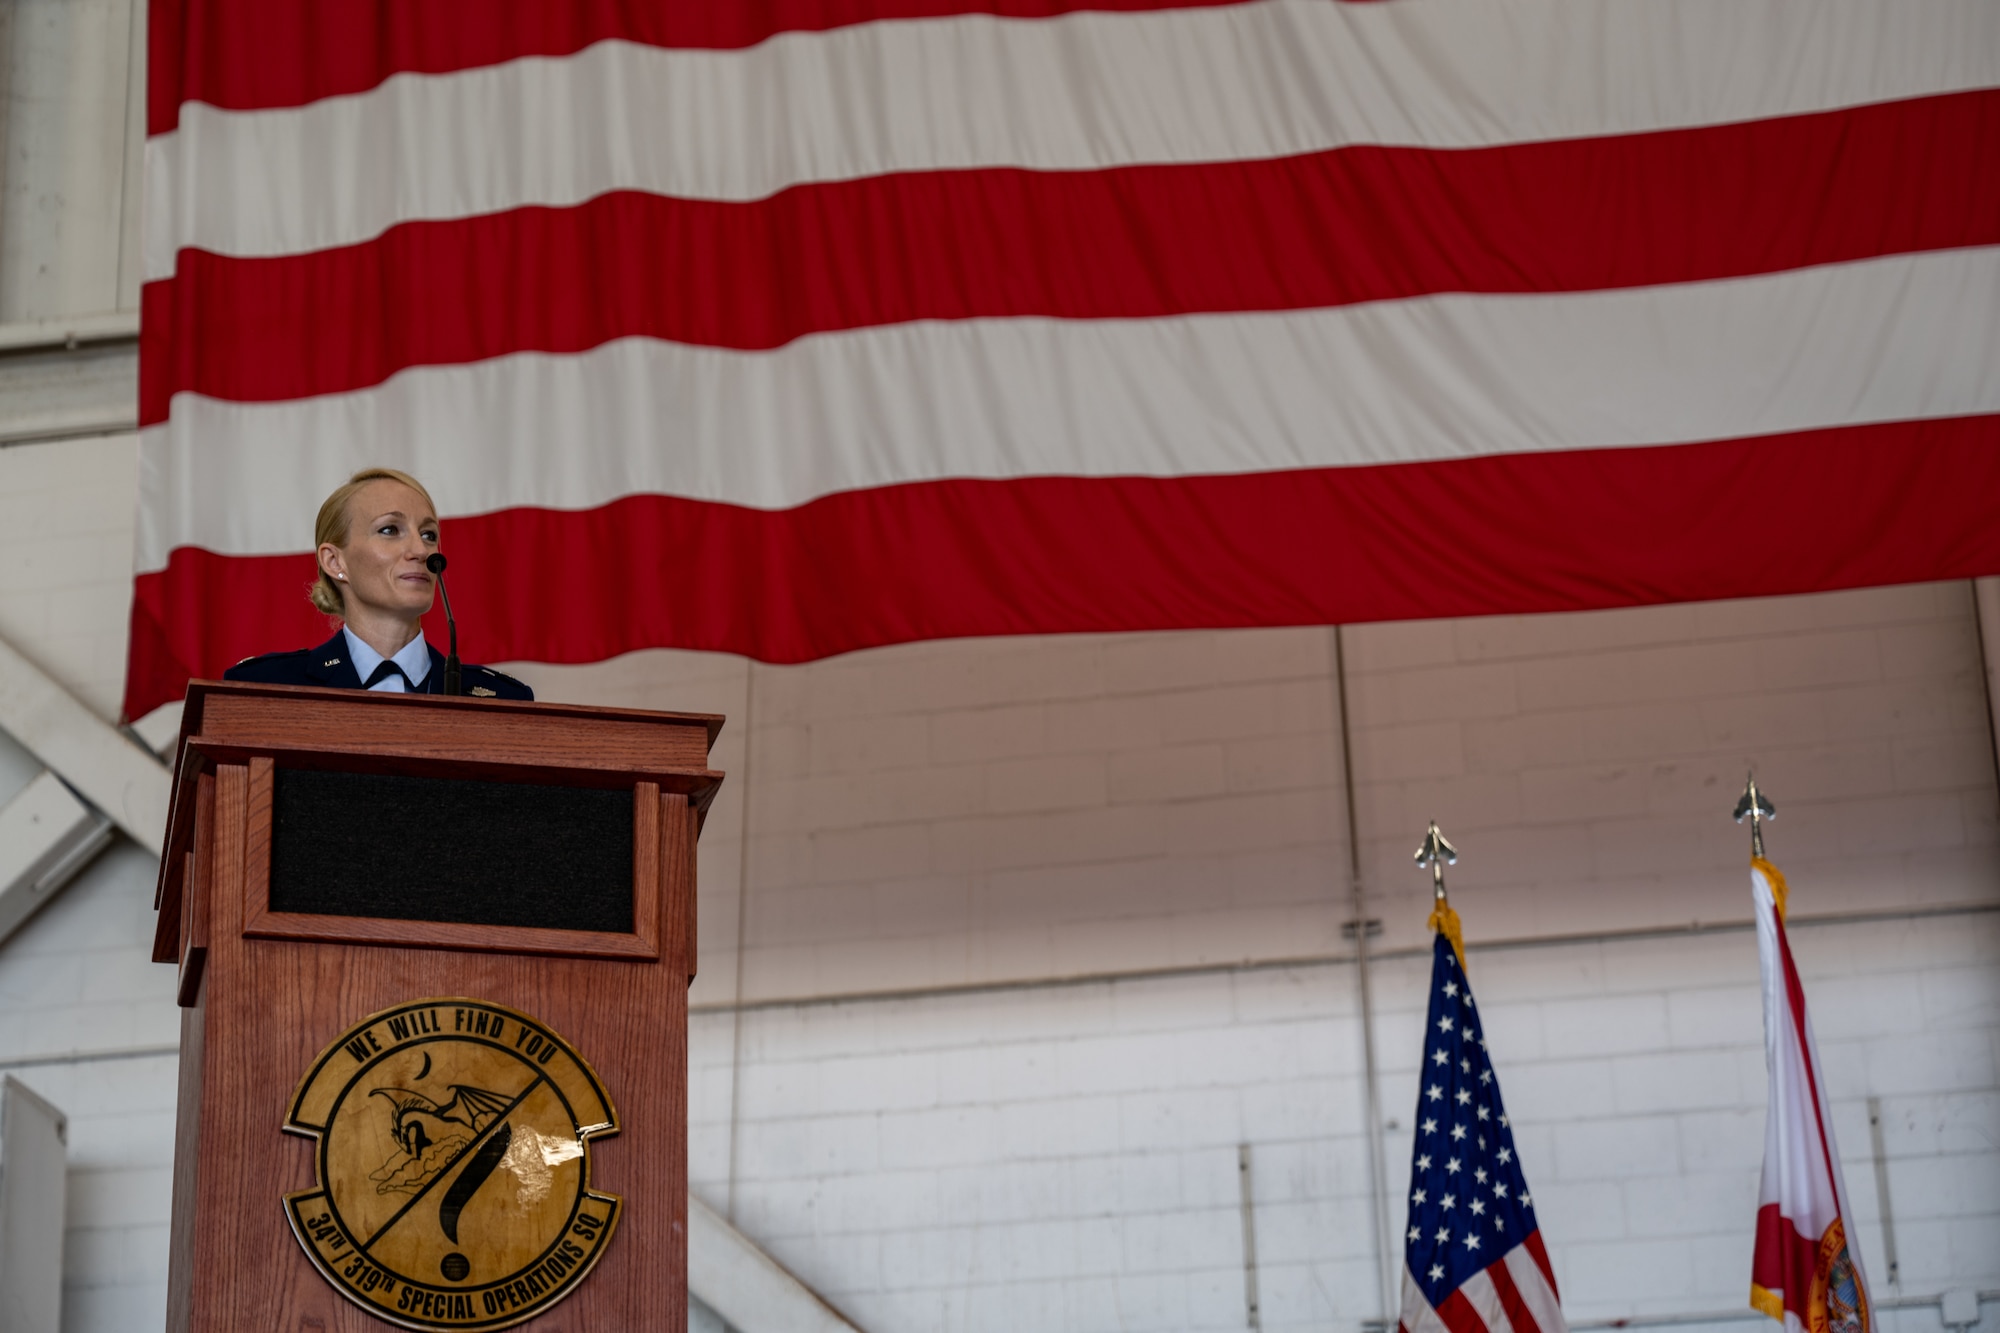 U.S. Air Force Lt. Col Caitlin Reilly, the 319th Special Operations Squadron commander, gives closing remarks during the 319th SOS change of command and reassignment ceremony at Hurlburt Field, Florida, May 3, 2024. The unit reassignment of the 319th SOS is the first of several squadron reassignments associated with a broader initiative by Air Force Special Operation Command to transform the 492d Special Operations Wing into a power projection wing. (U.S. Air Force photo by Senior Airman Hussein Enaya)